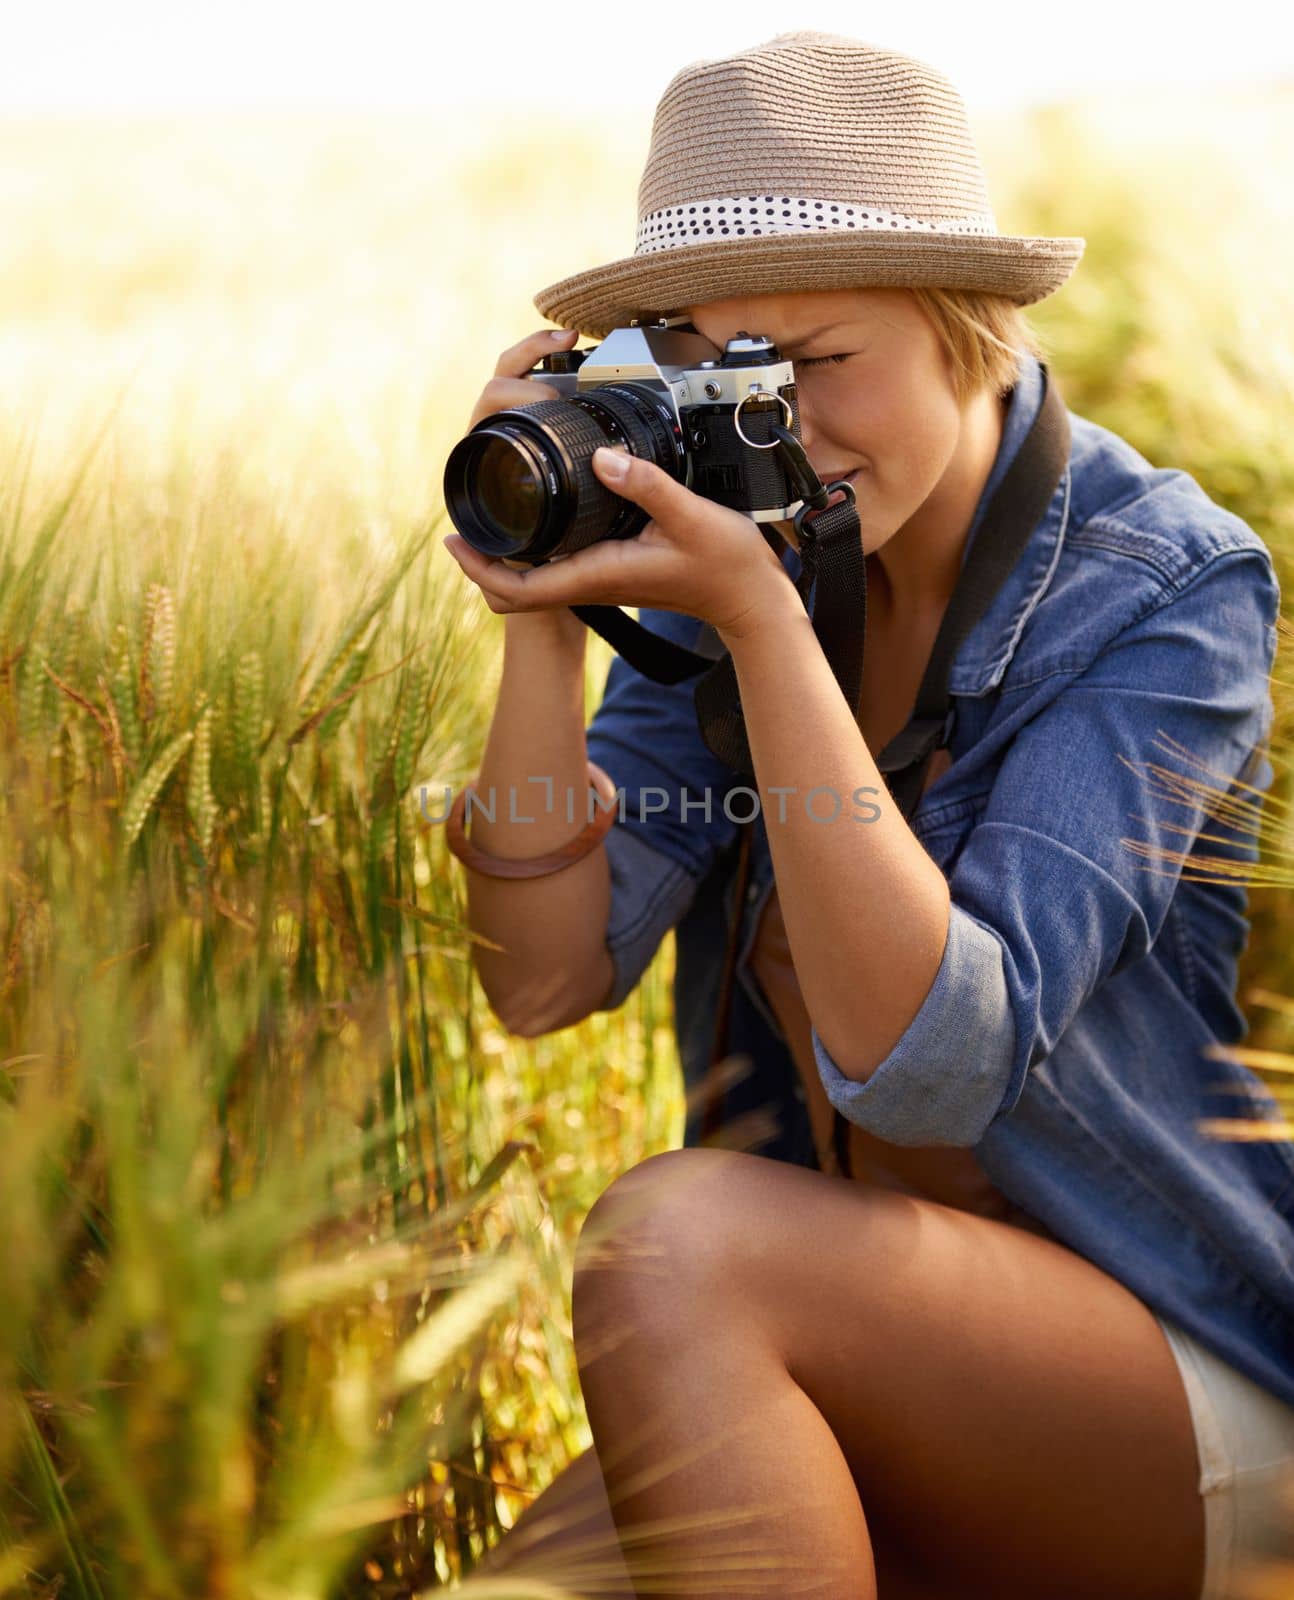 Fascinated by nature. an attractive young woman outdoors on a summer day